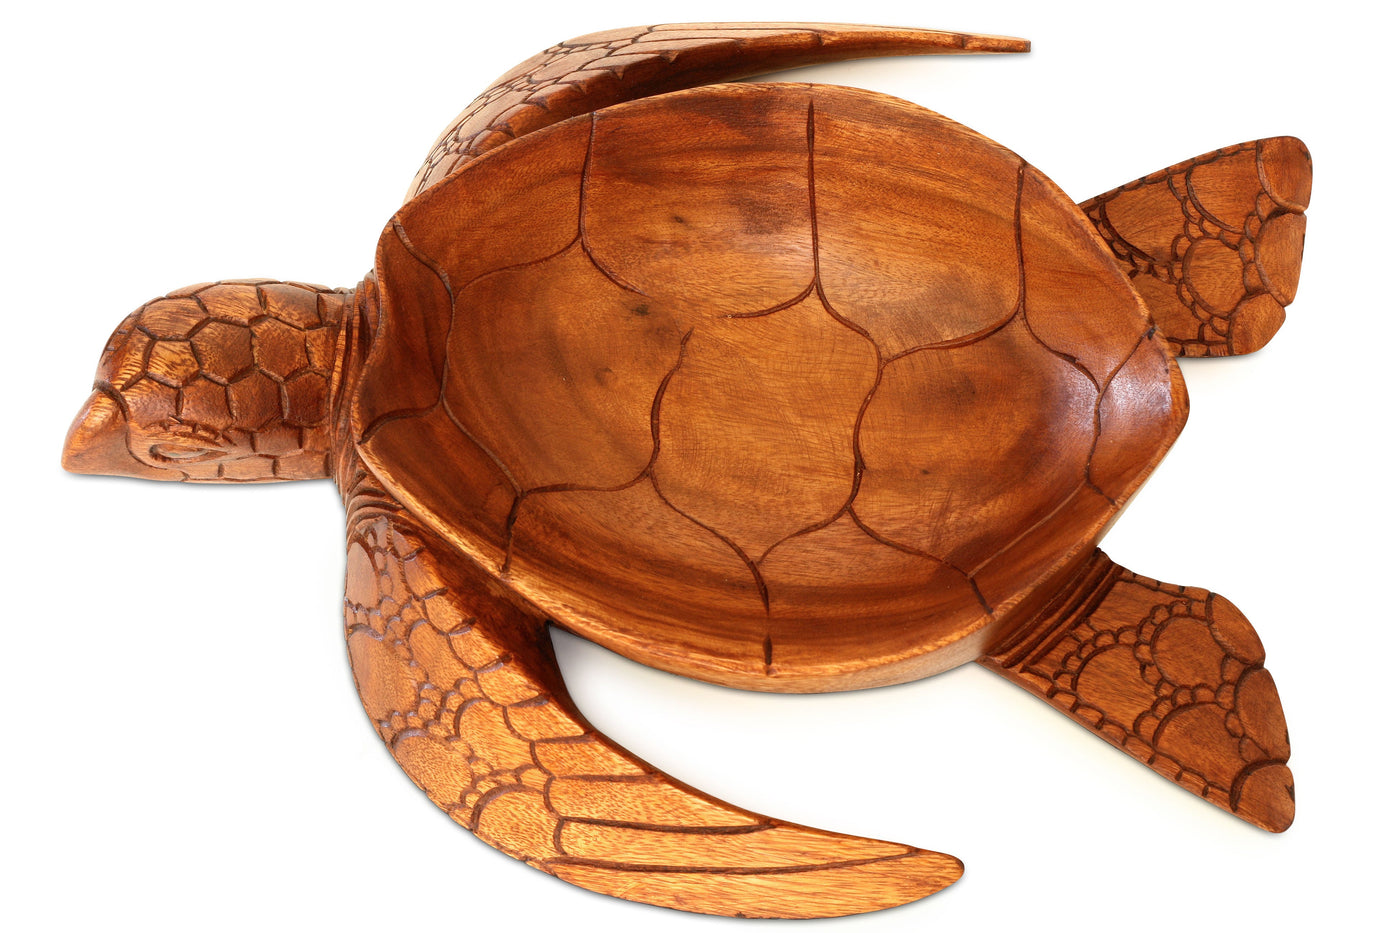 Wooden Handmade Turtle Serving Fruit Decorative Bowl Centerpiece Hand Carved Art Home Decor Decoration Artwork Handcrafted Gift Storage Accent Wood